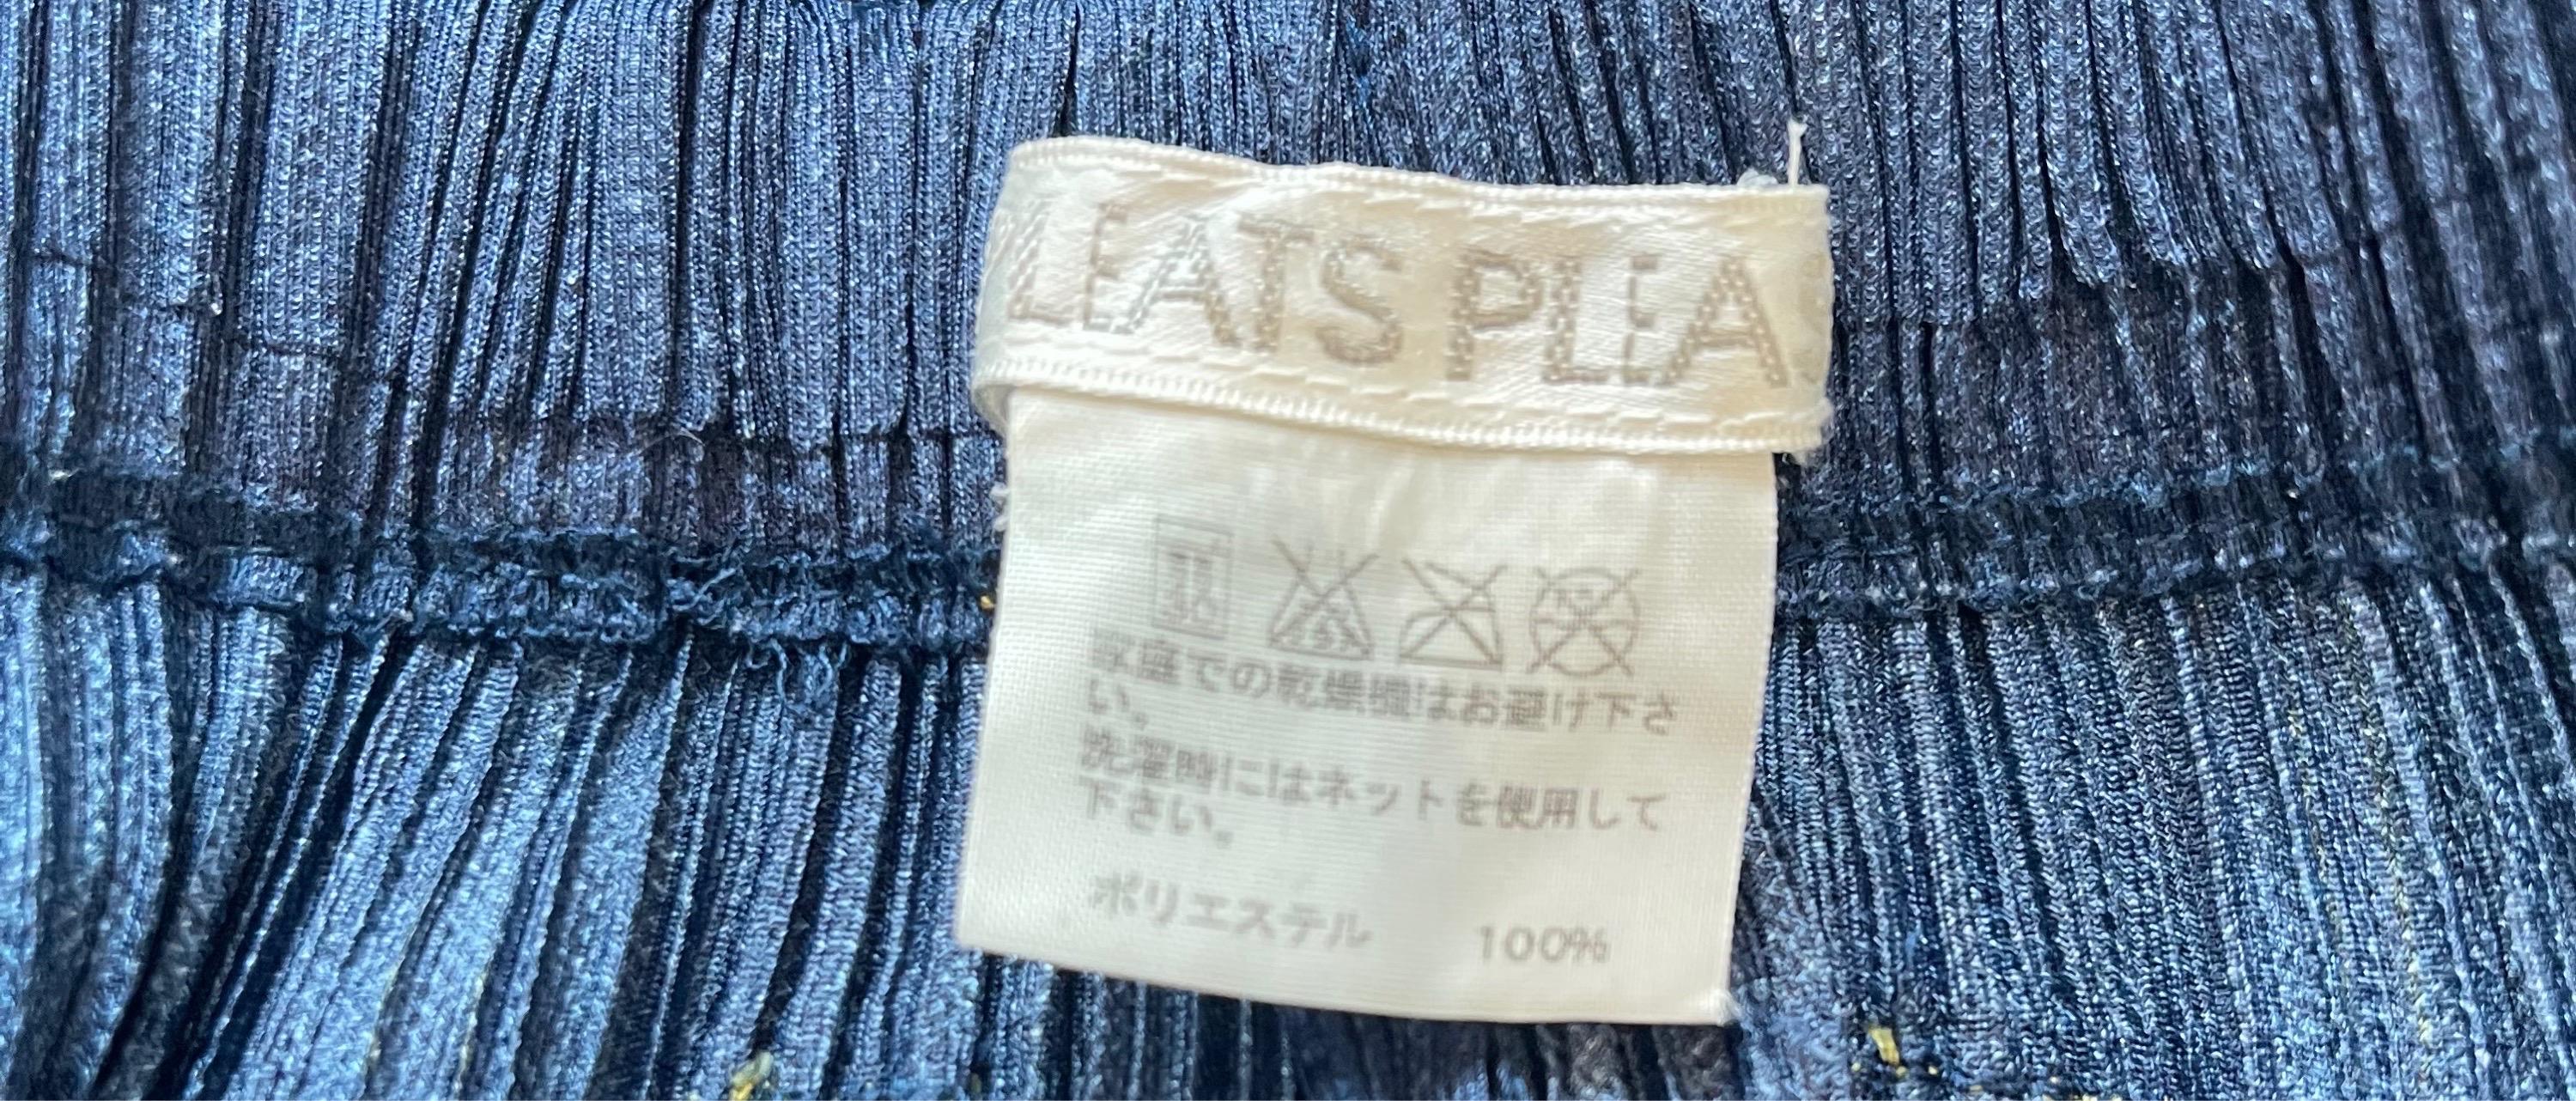 Amazing vintage 1990s Issey Miyake Pleats Please trompe l’oeil pleated pants ! At first glance, these look like a pair of blue jeans. Stitching around front and rear pockets, belt loops and waistband.
The pictured vintage Issey Miyake blouse is also